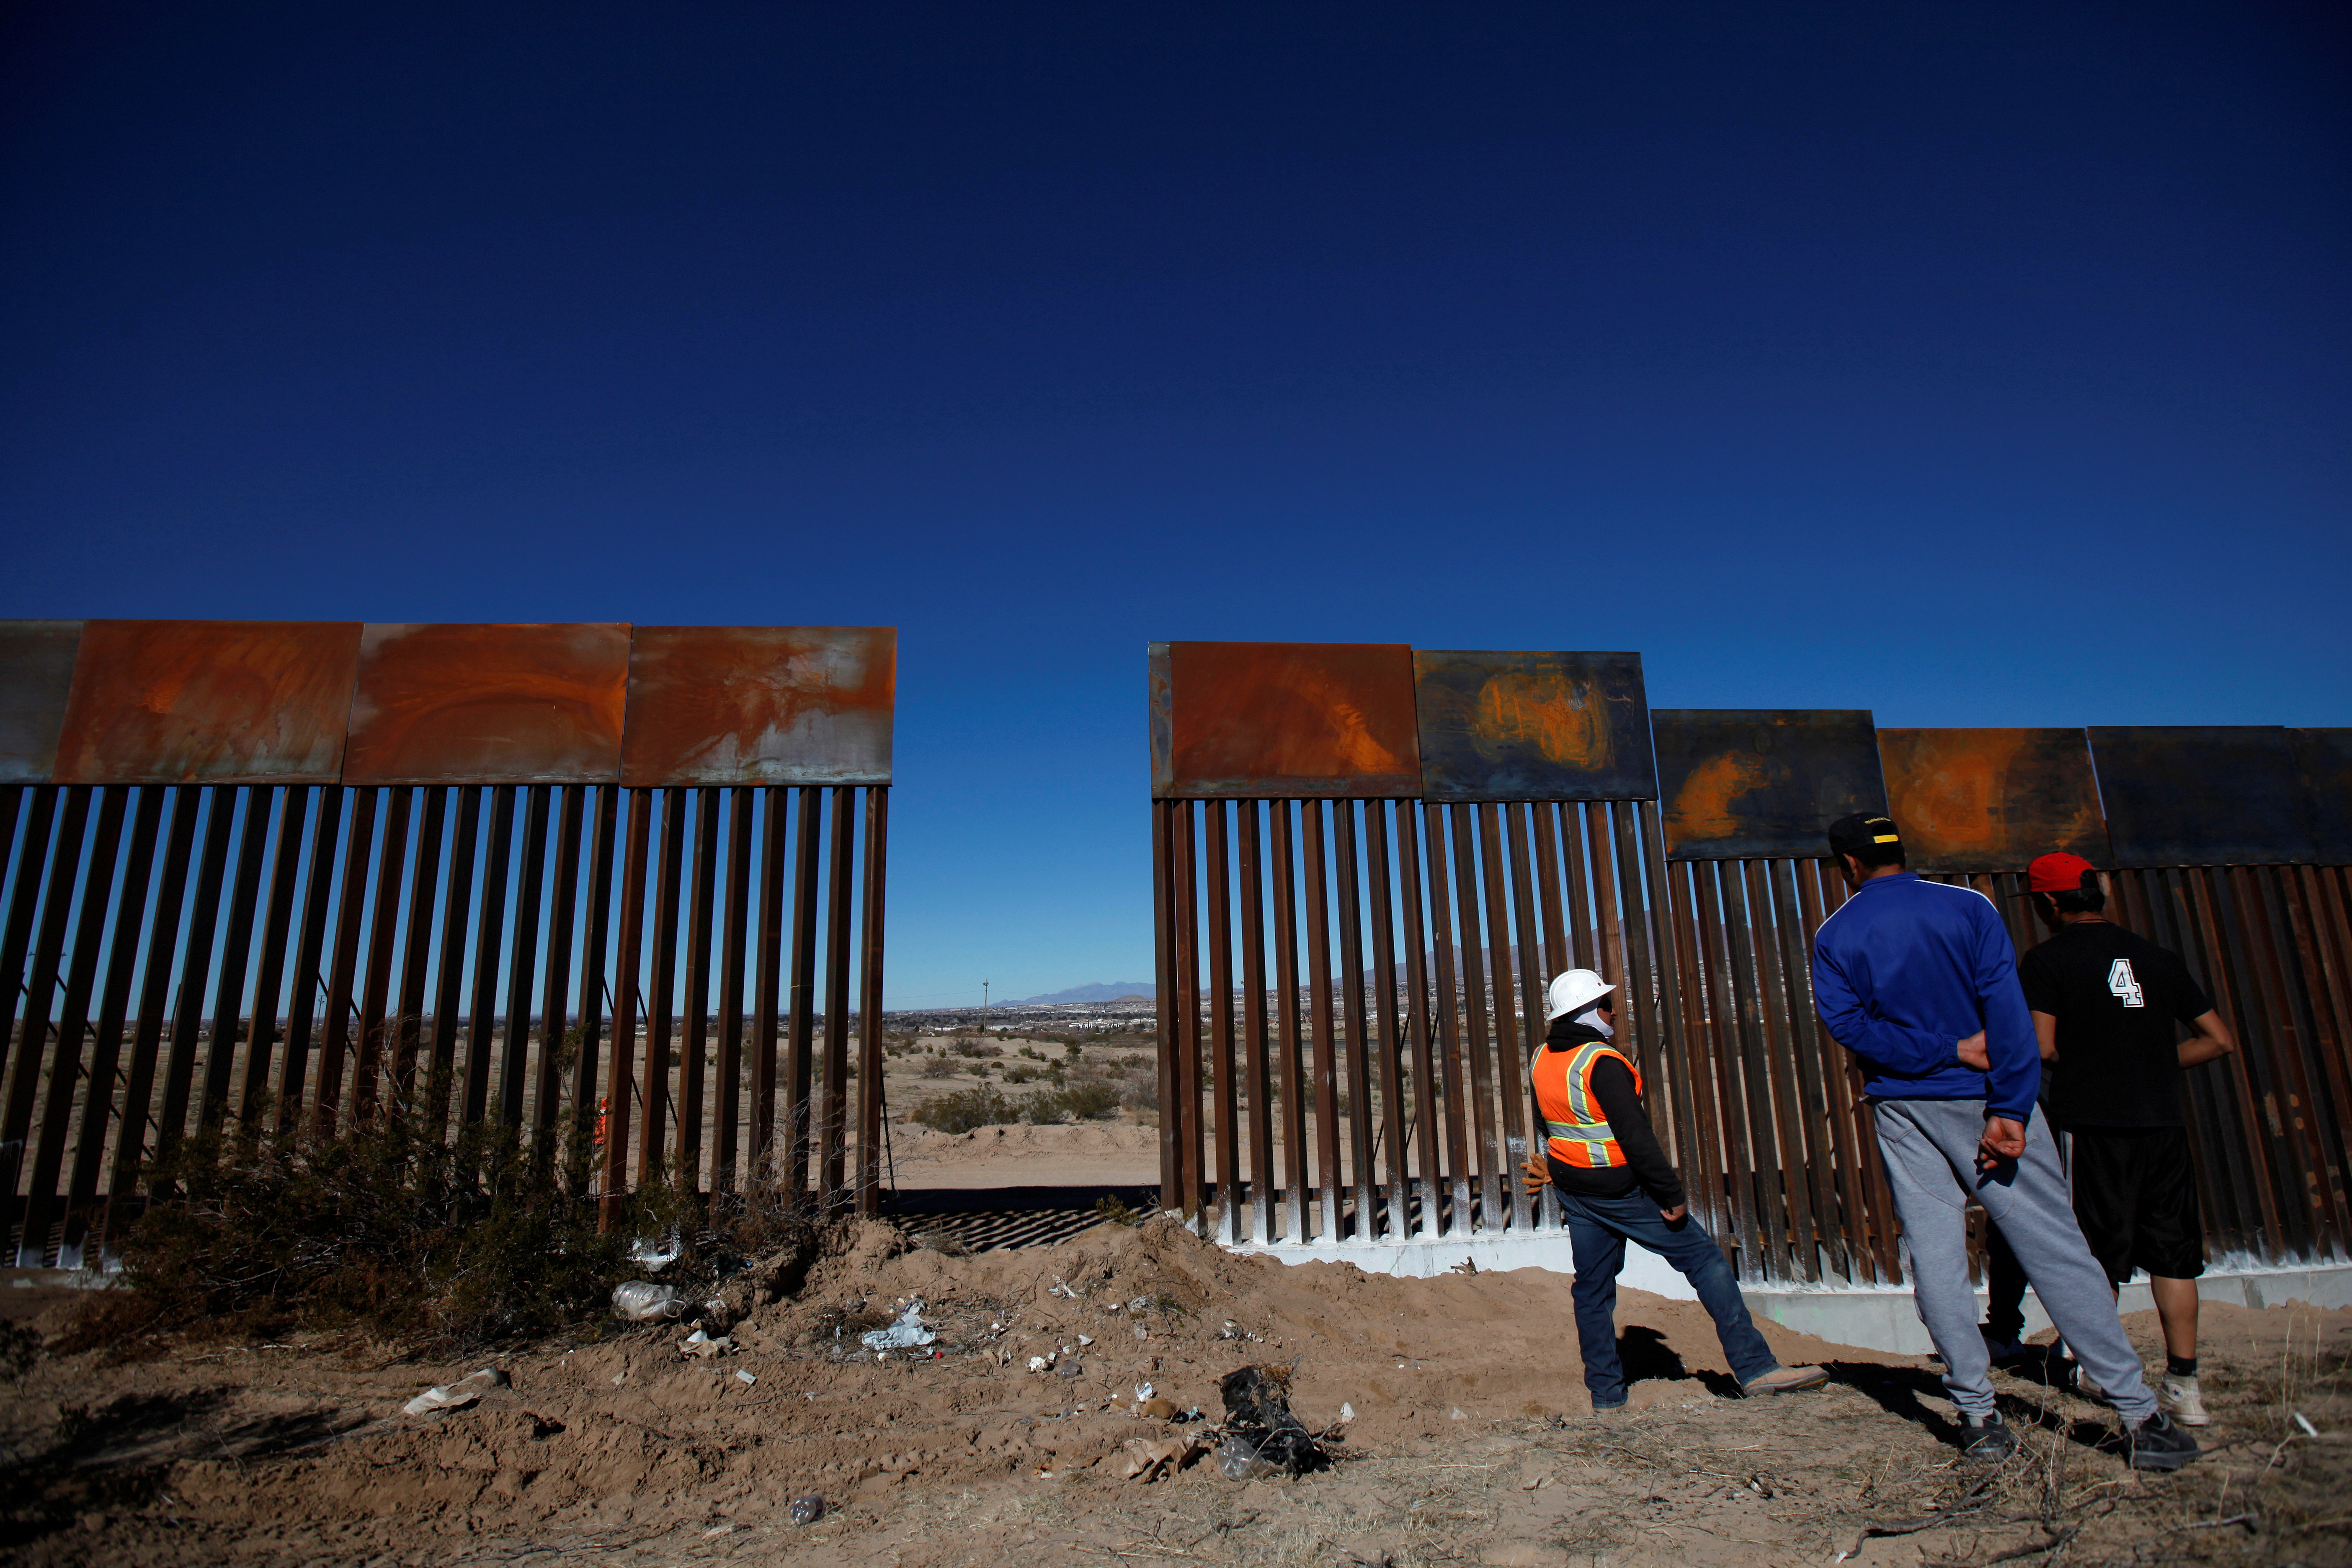 Why the border wall's costs far outweigh its benefits